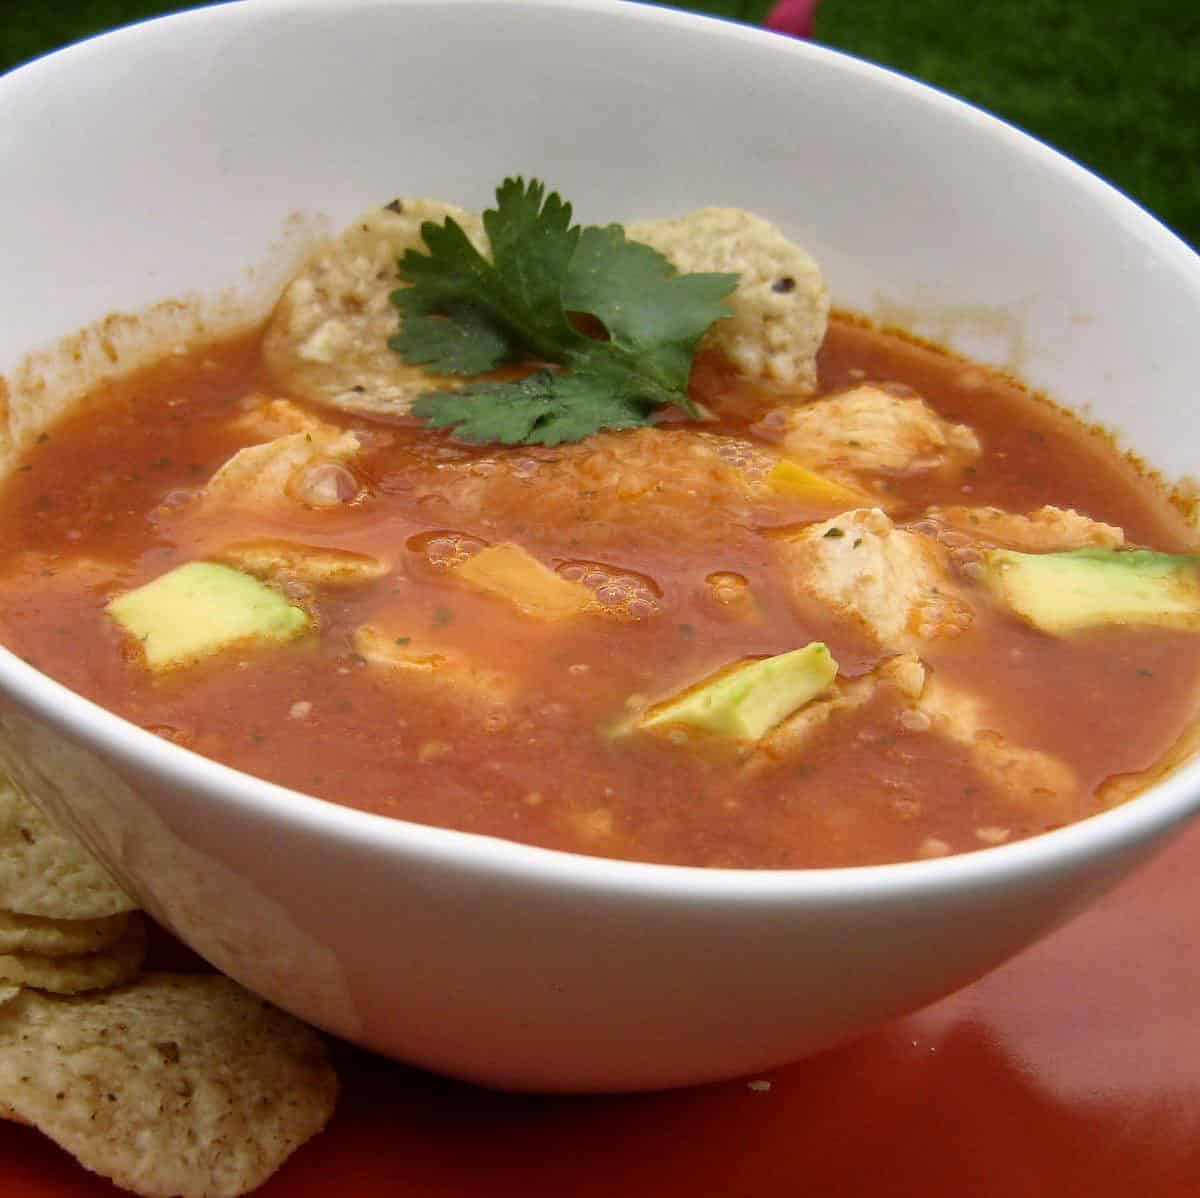 Warm Your Soul with this Hearty Chicken Tortilla Soup Recipe